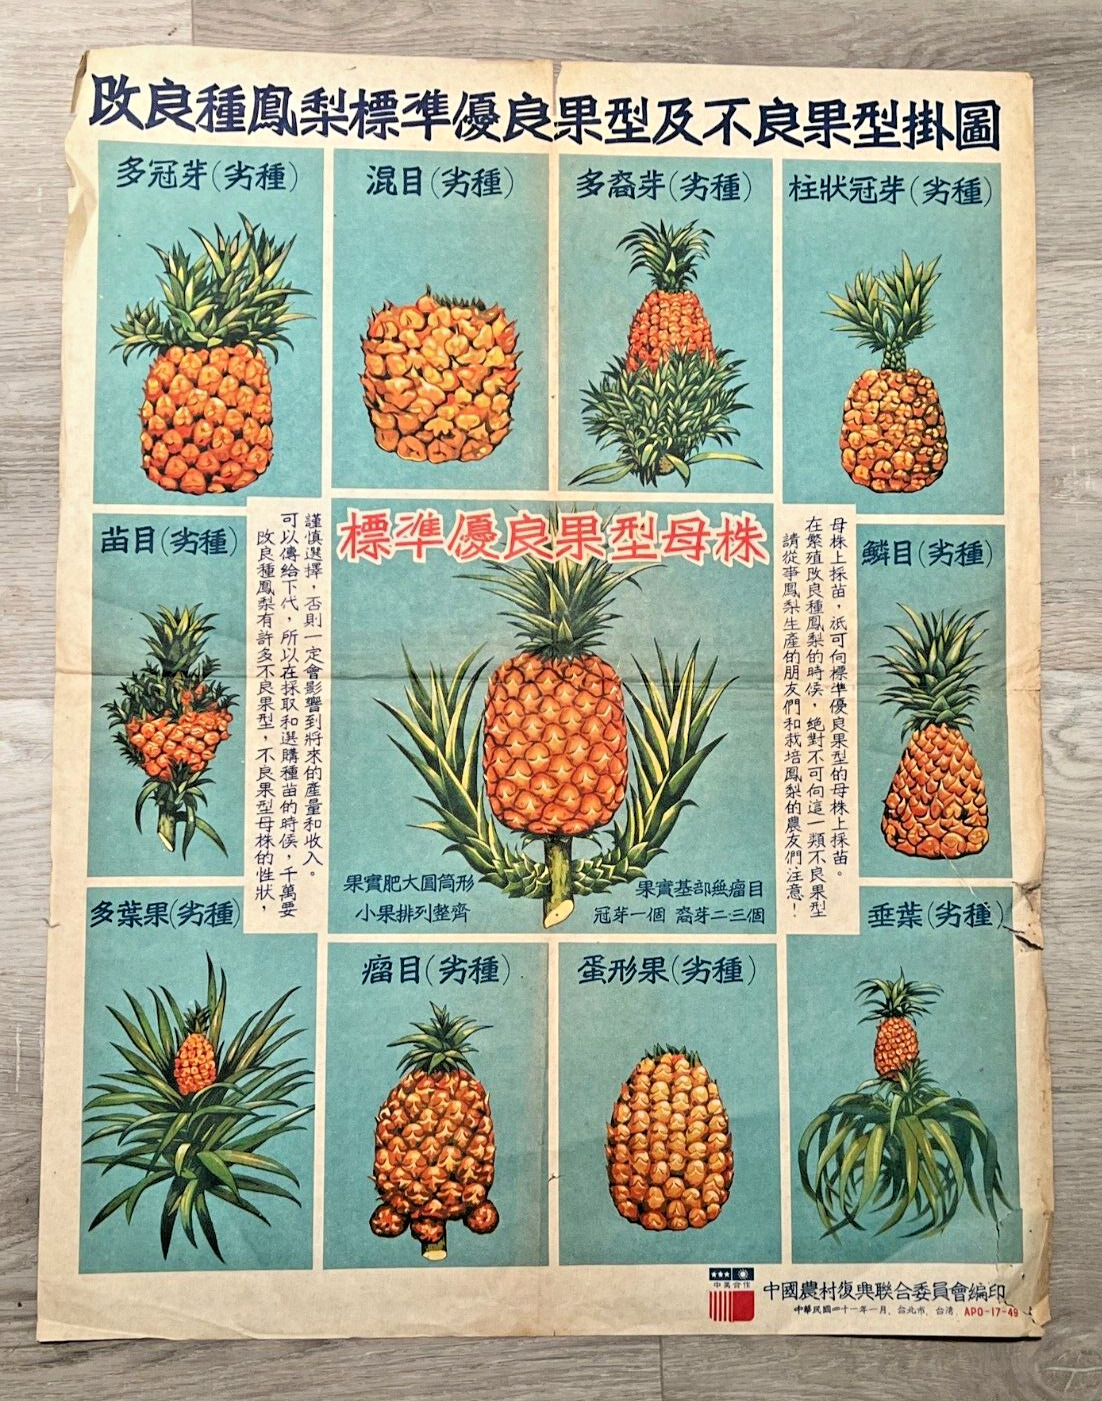 1940s Chinese Rural Reconstrucrion Poster Standards Of Bad & Good Pineapples